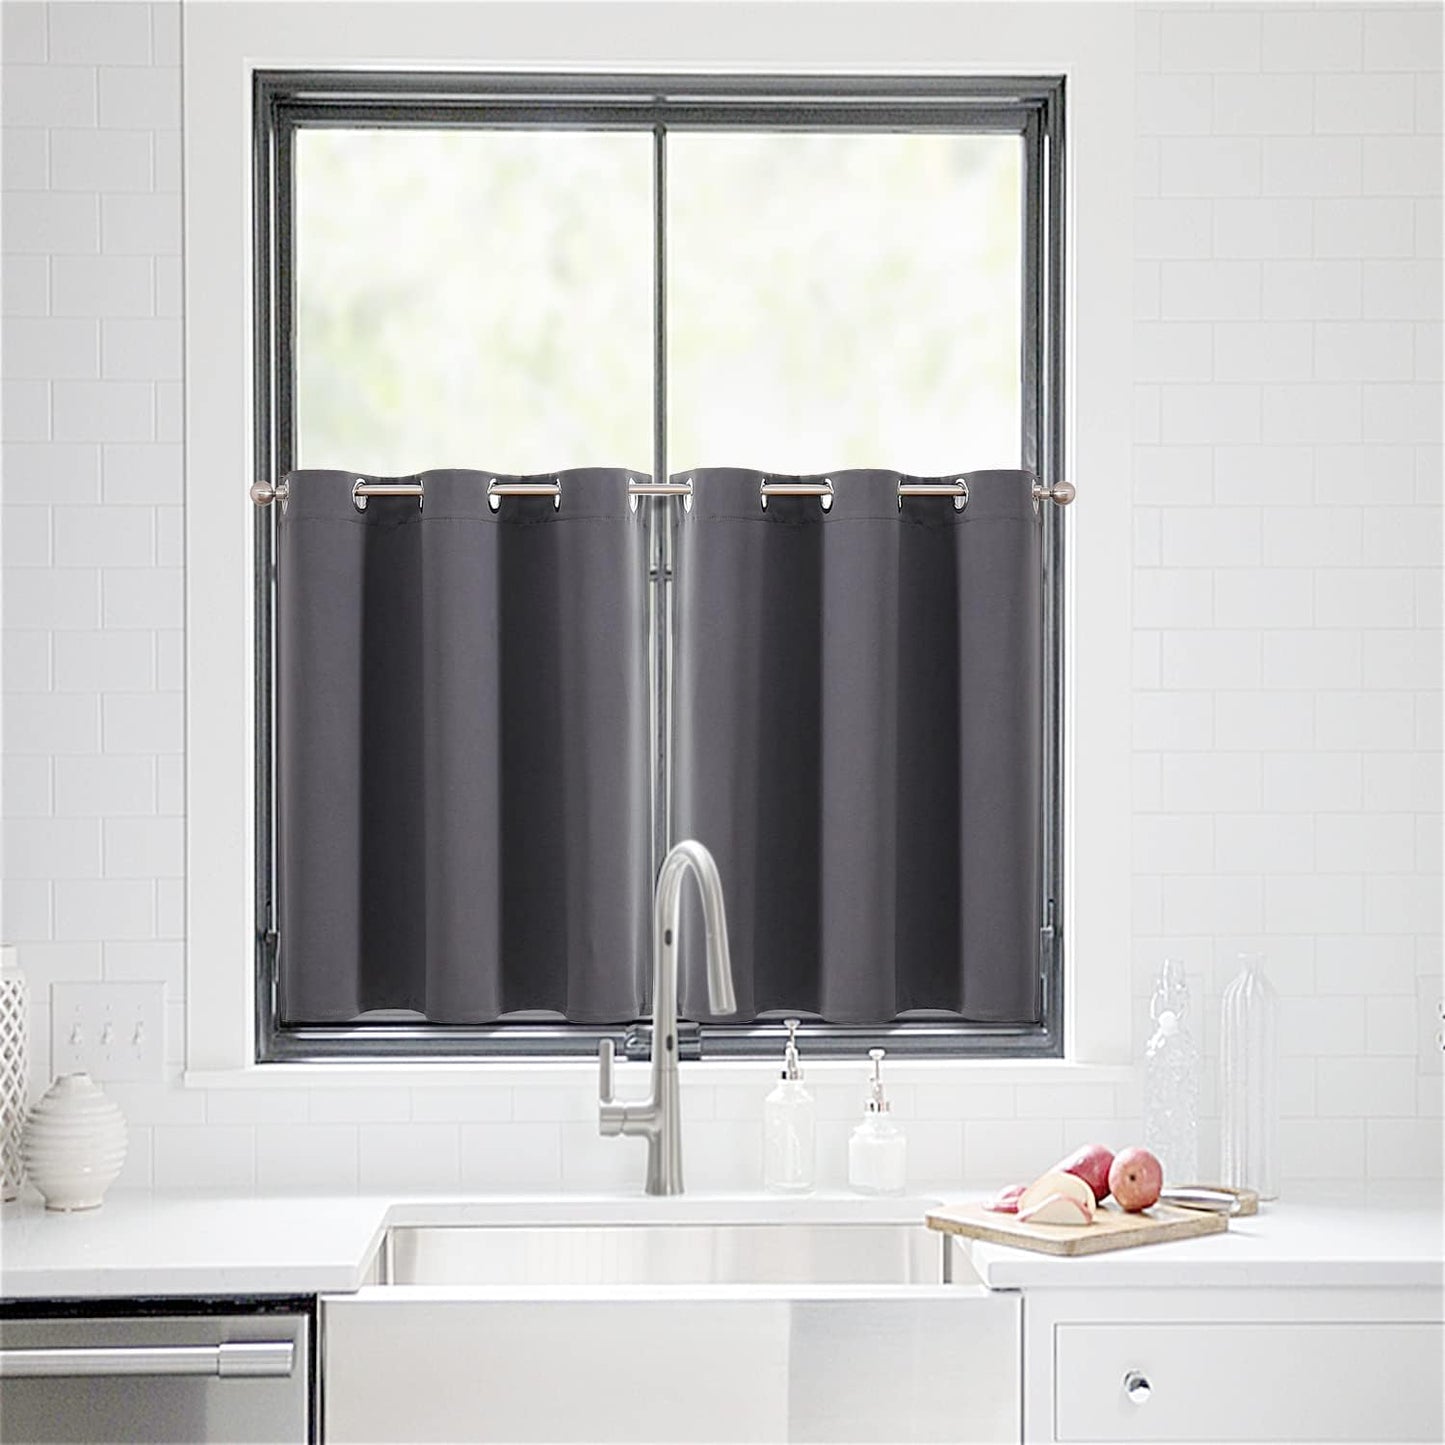 Small Window Curtains for Kitchen and Bedroom - Grommet Short Thermal Insulated Room Darkening Curtains (2 Panels, Dark Grey, 42 X 36 Inch)